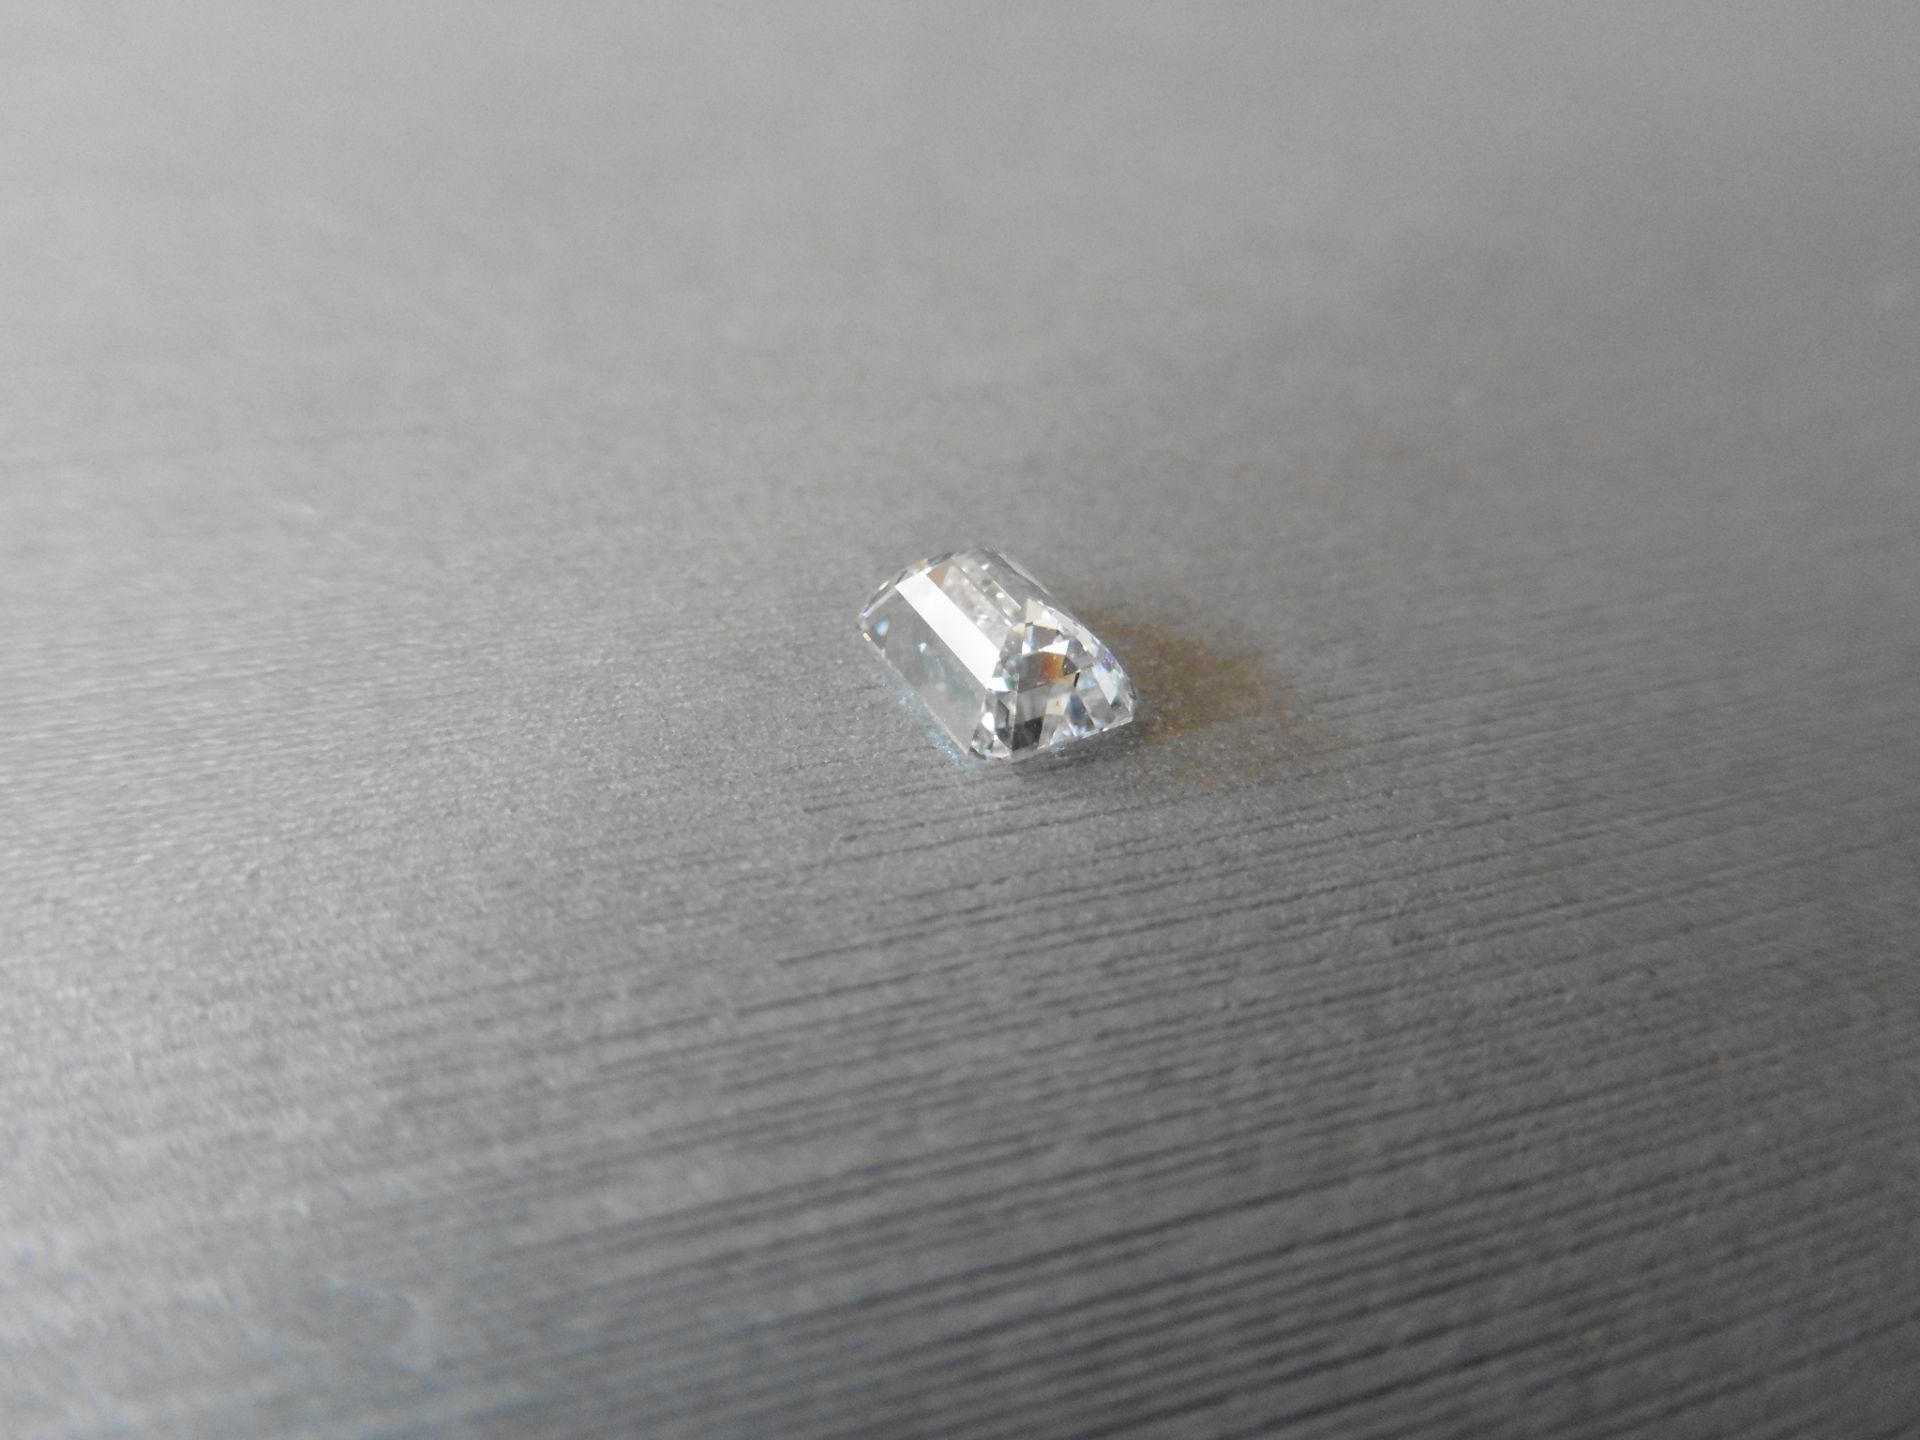 1.00ct single emerald cut diamond G colour VS1 clarity. 6.74 x 4.76 x 3.18. Suitable for mounting in - Image 3 of 6